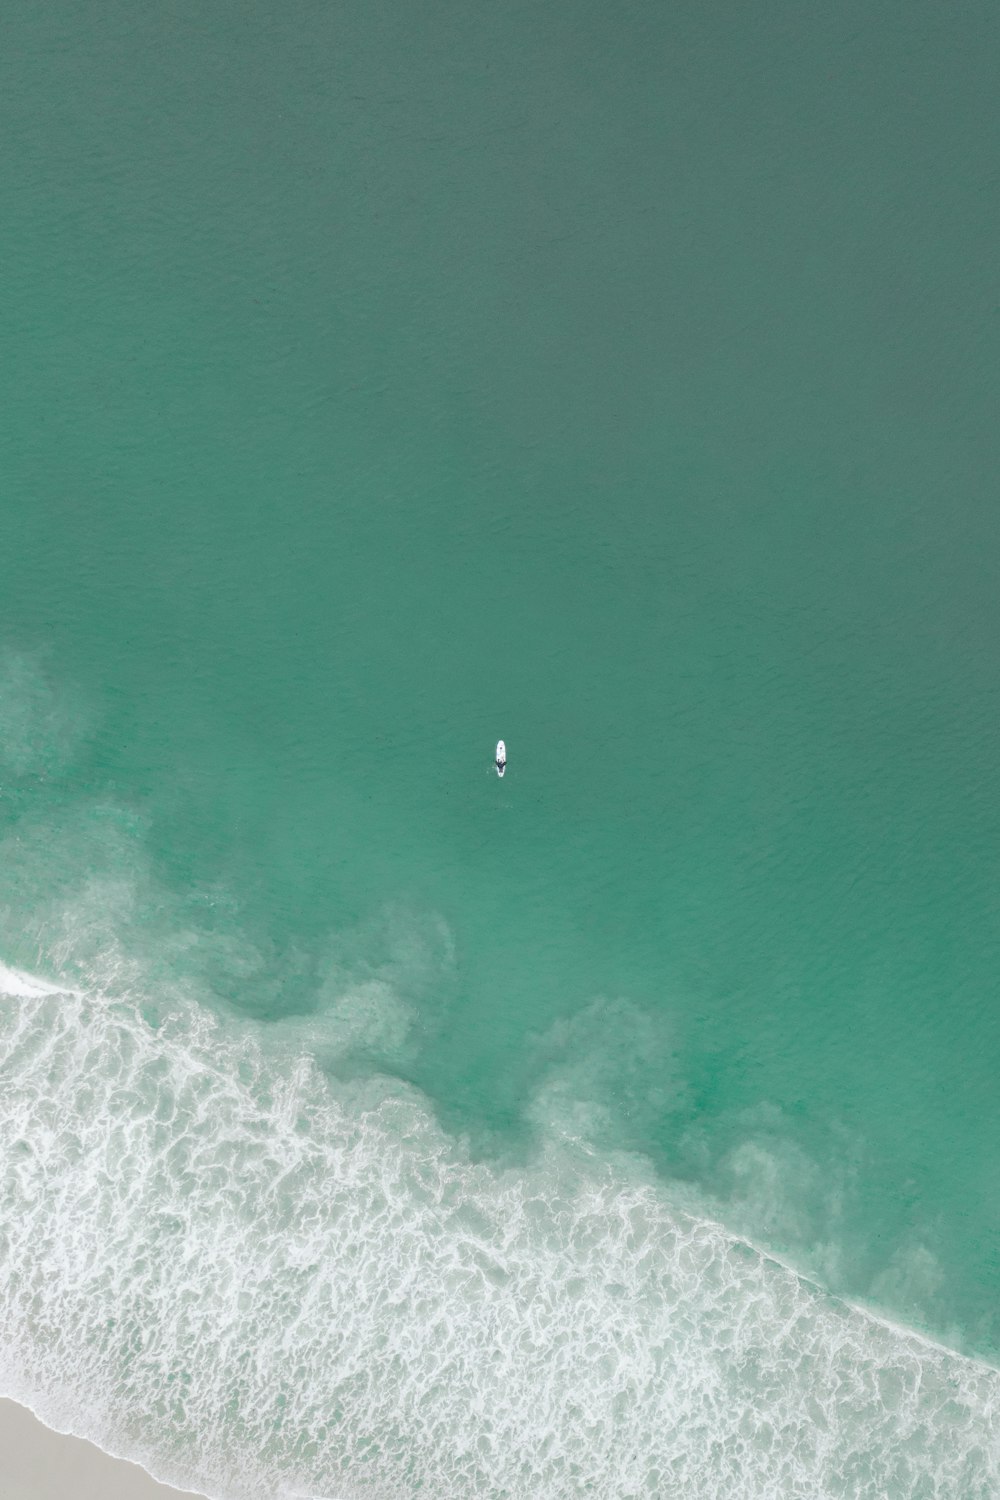 aerial view of person surfing on sea waves during daytime